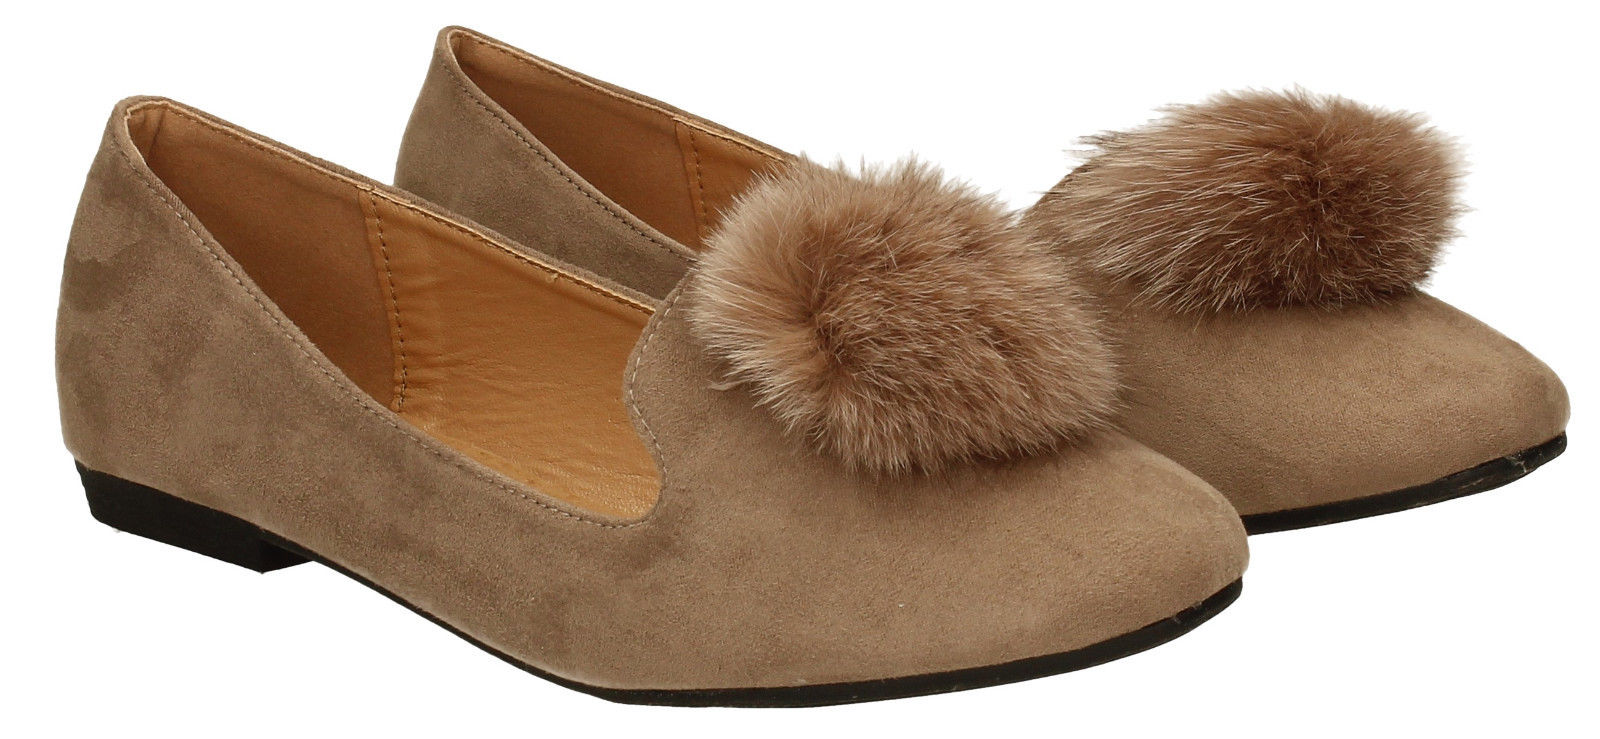 Womens Fur Ball Pom Pom Flat Shoes Suede Slip on Brown Ballet Pumps Ladies Shoes